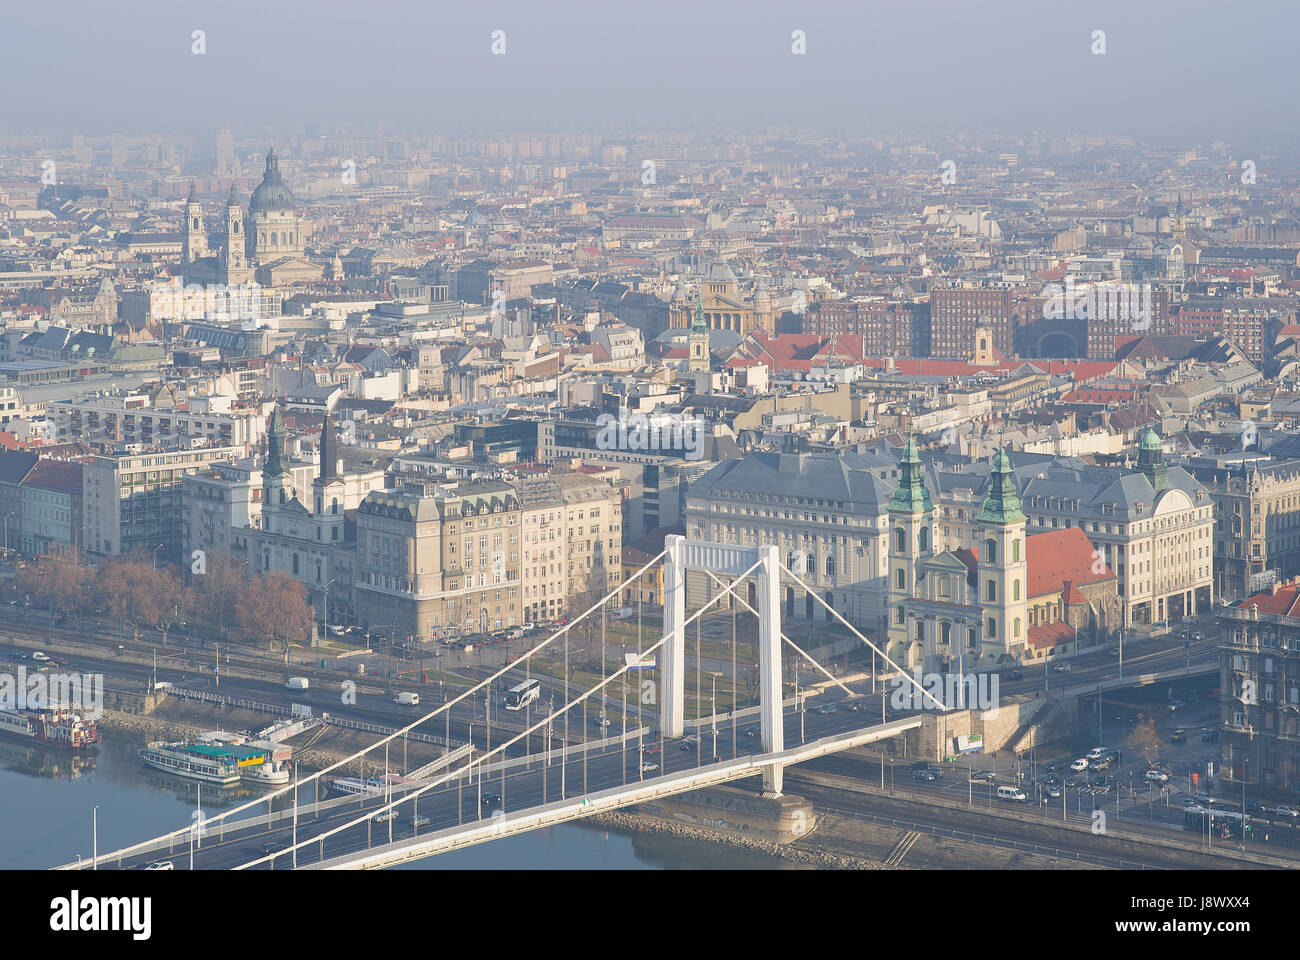 view of budapest in hungary Stock Photo